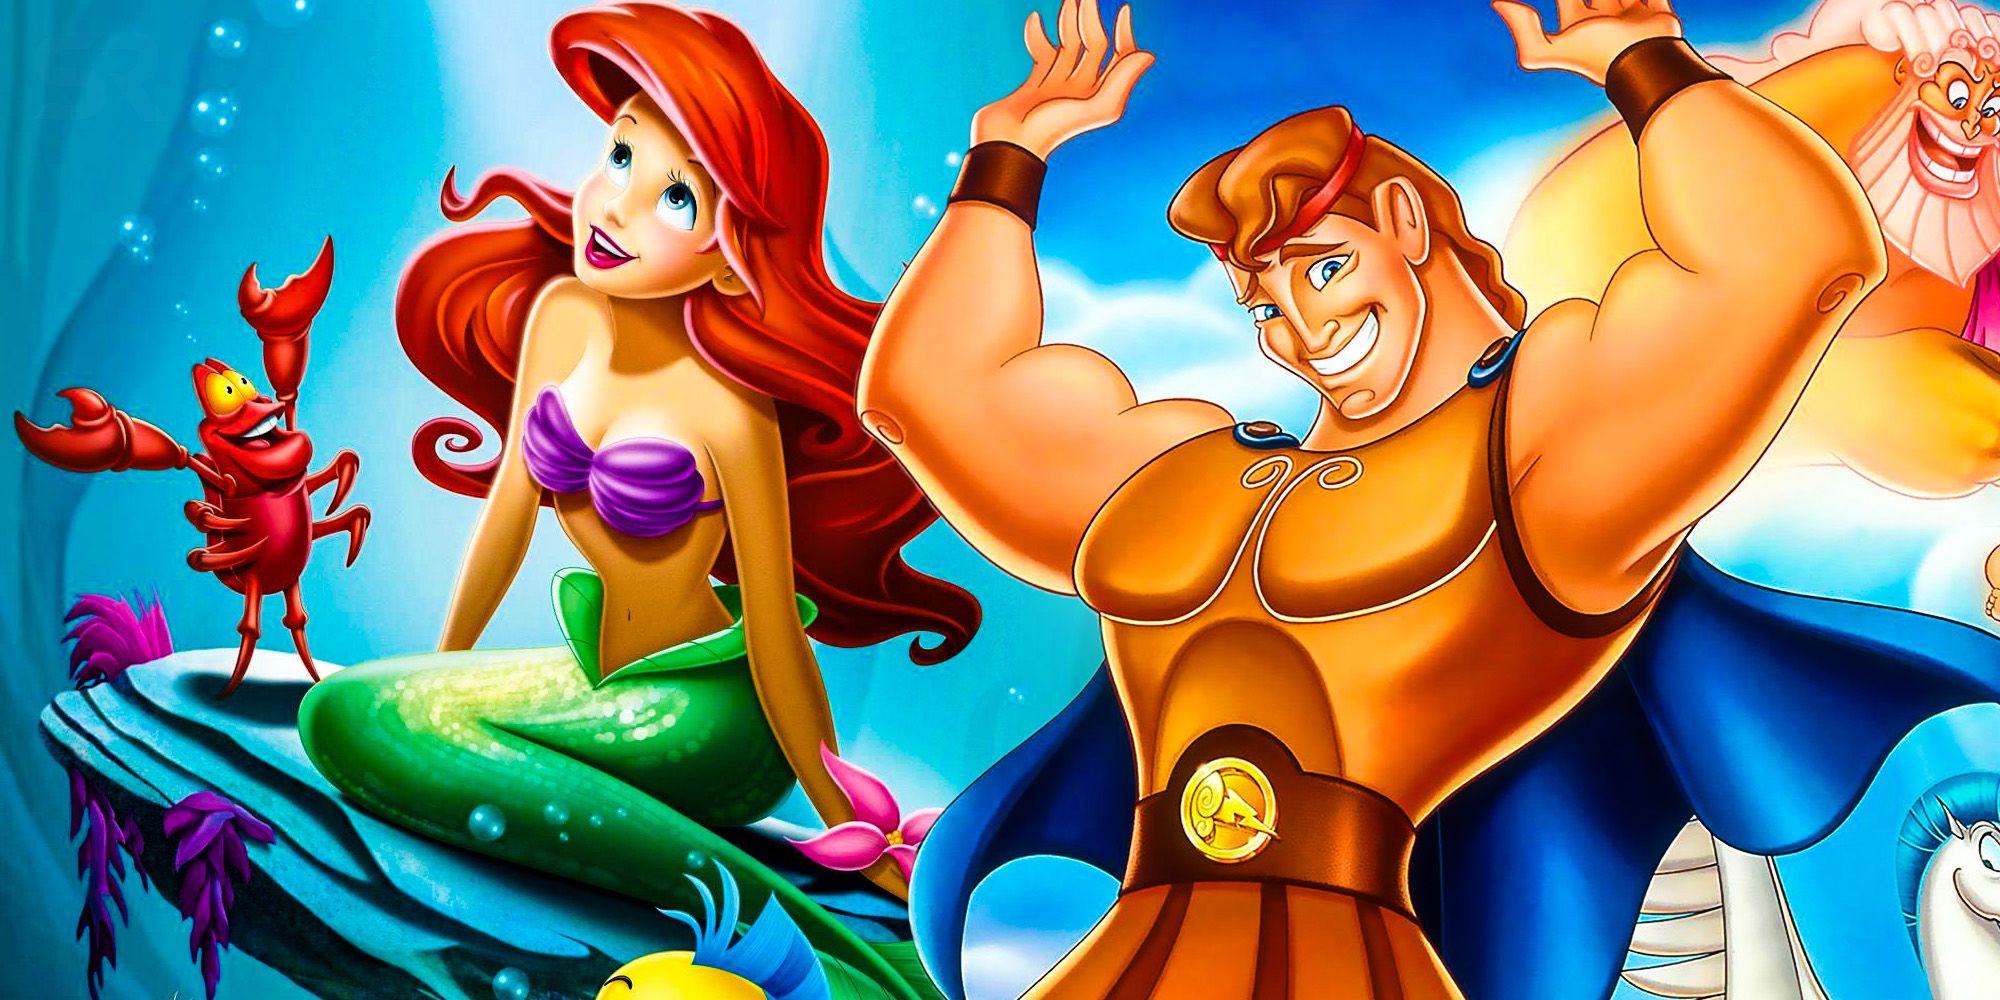 Hercules and ariel related theory